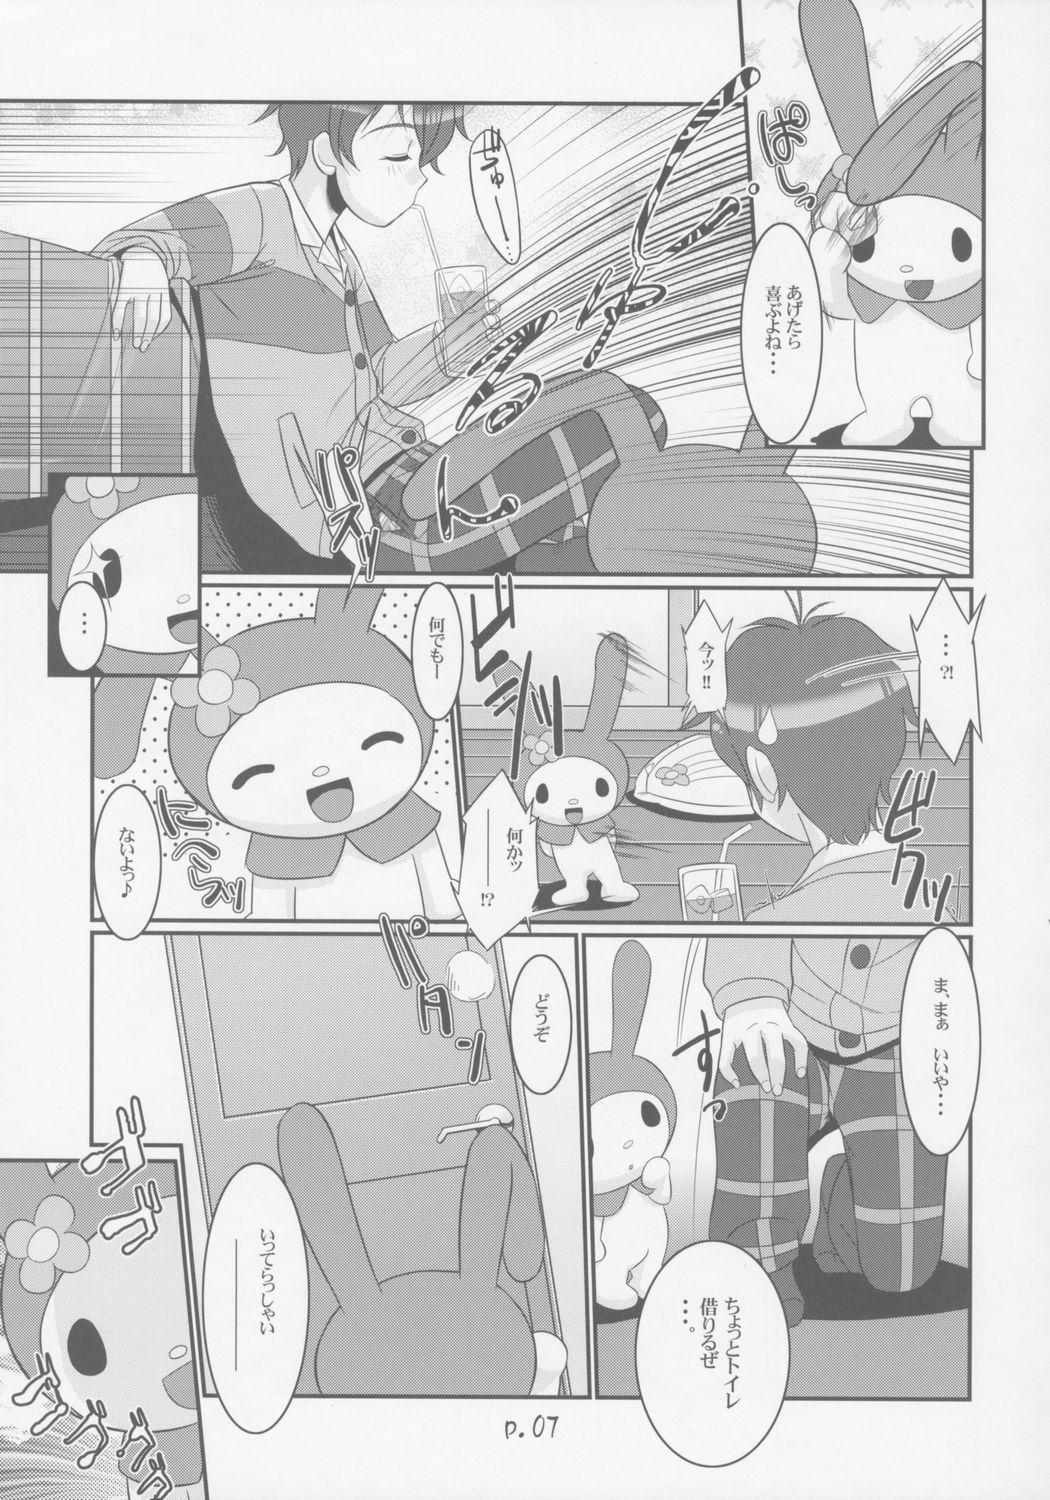 4some Sukimero - Onegai my melody Best Blowjob Ever - Page 6